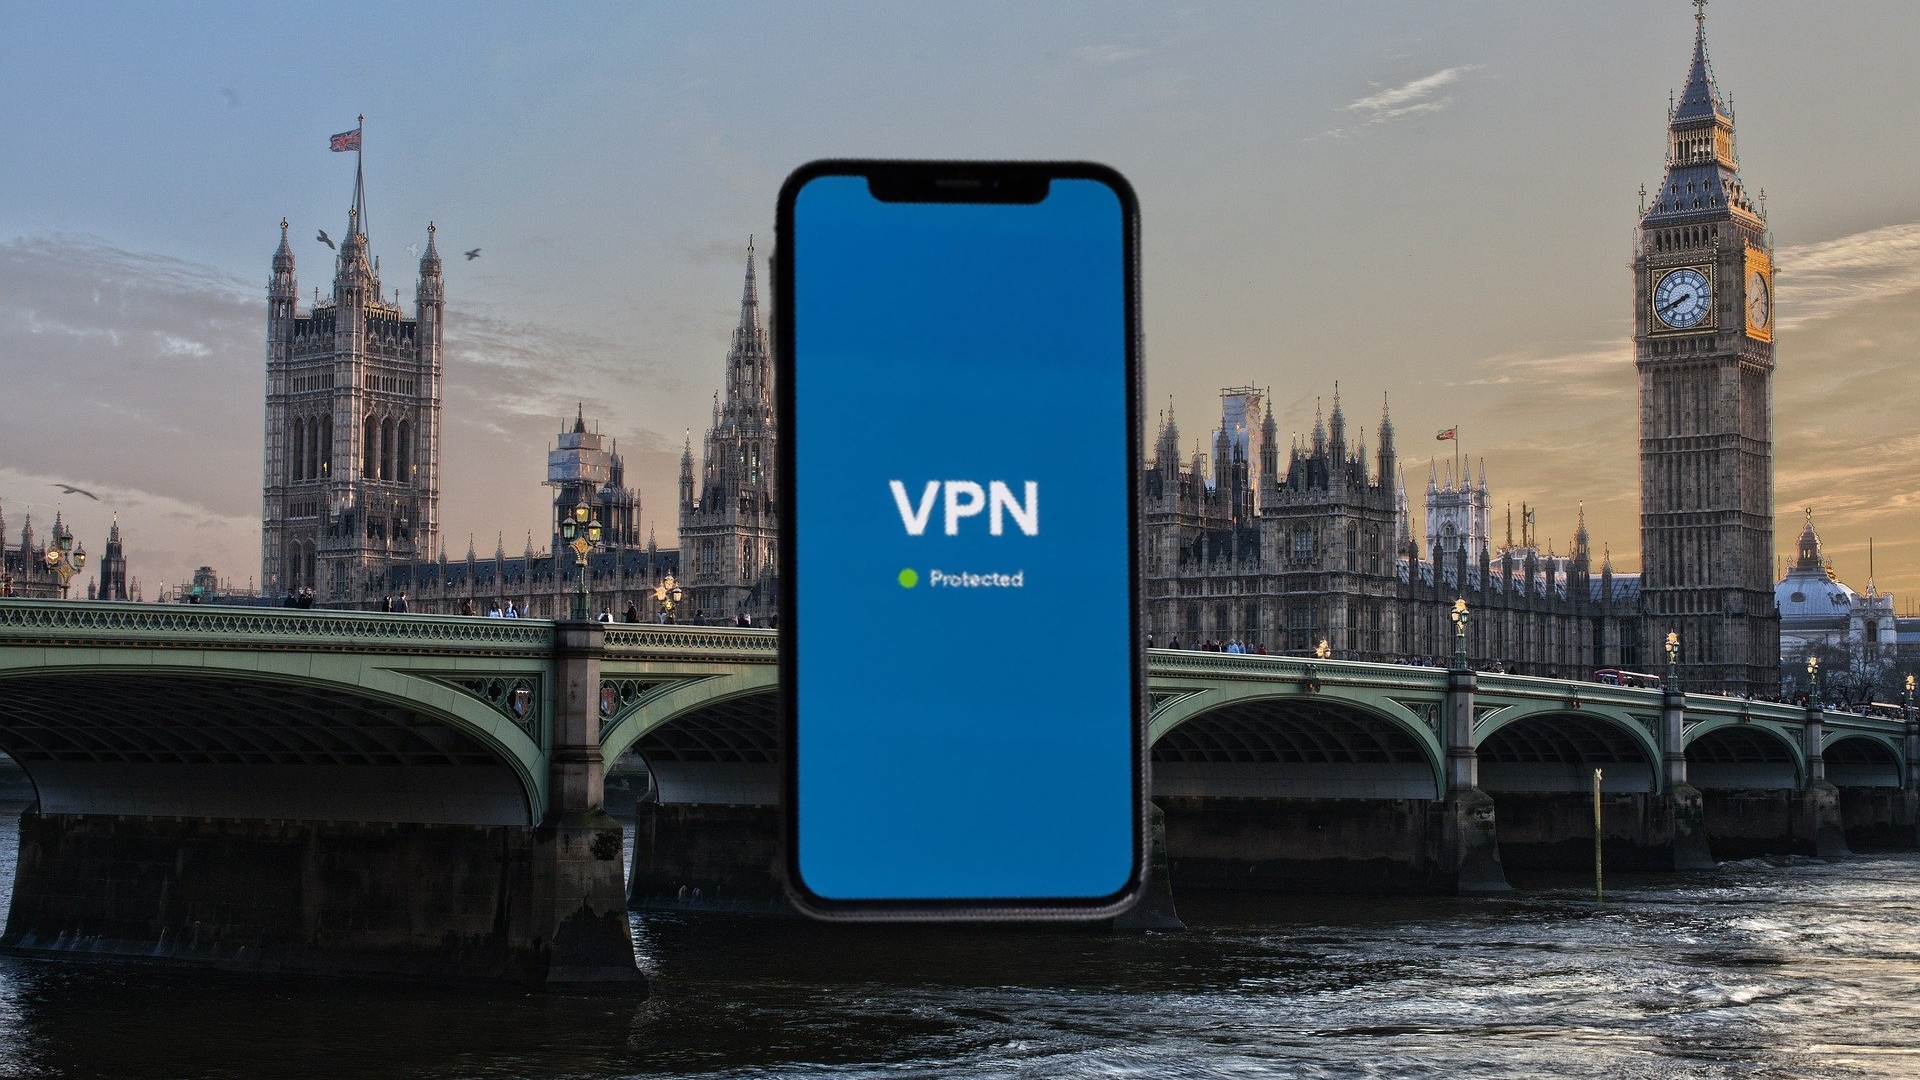 The best UK VPN services in 2022